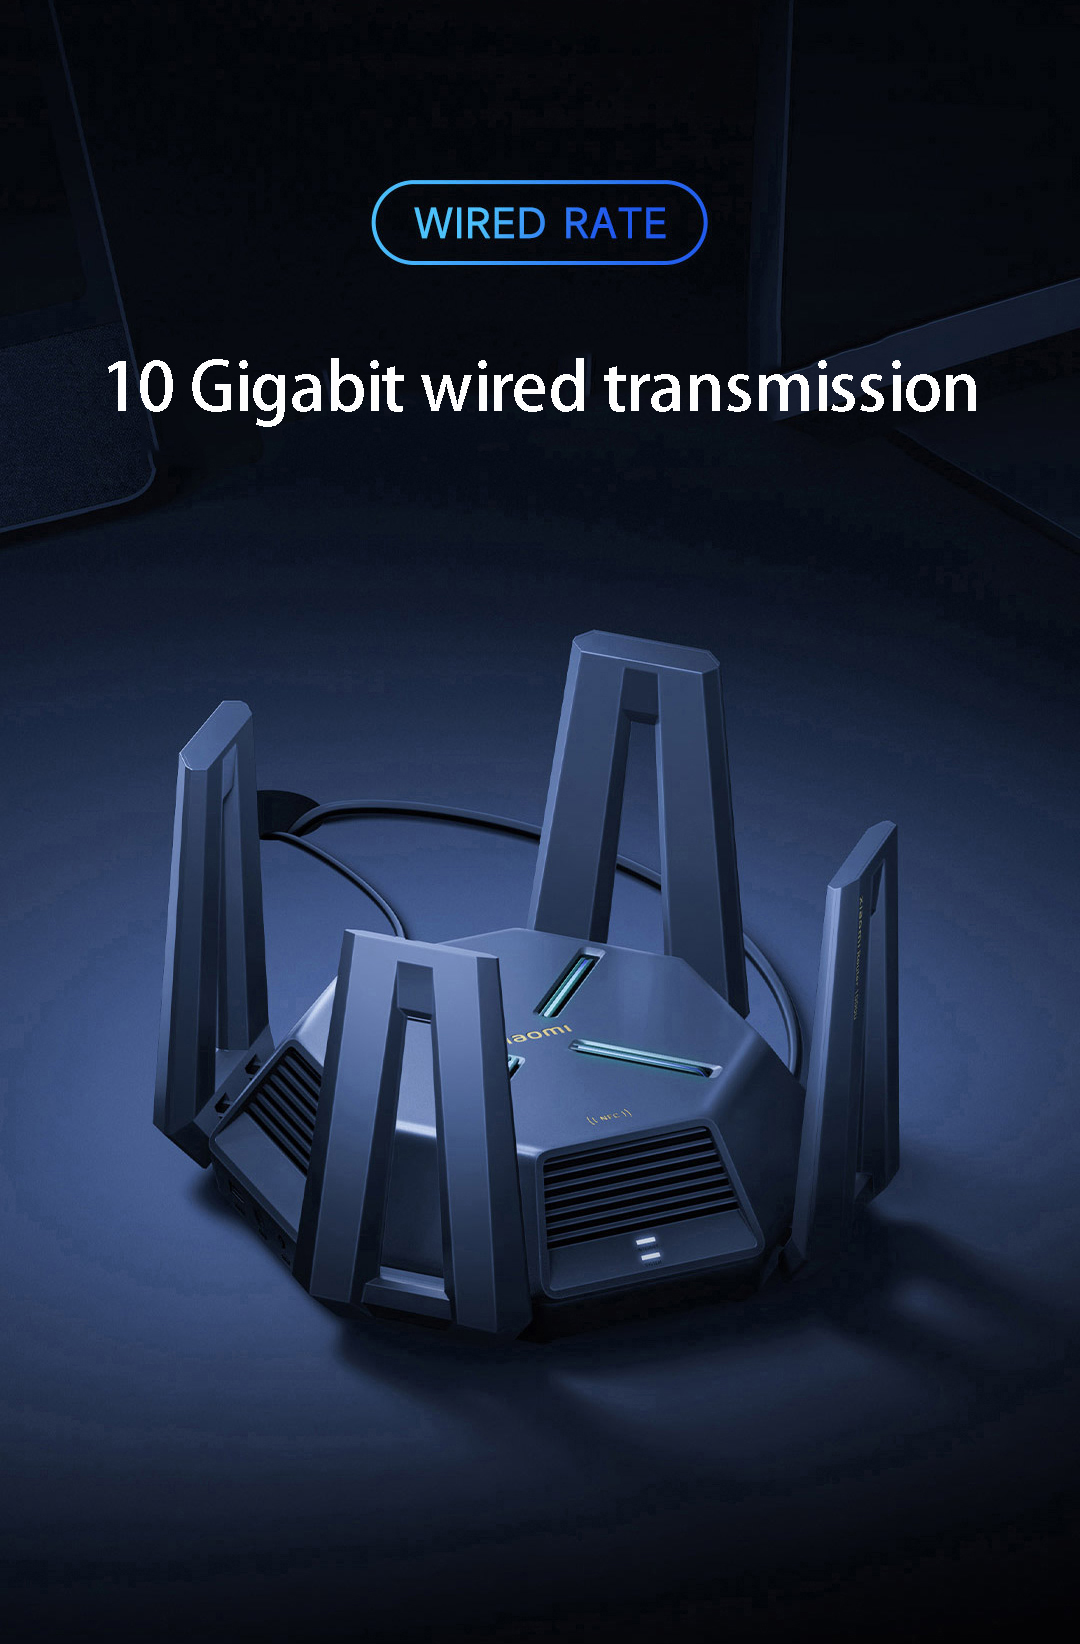 XIAOMI 10 Gigabit Wireless Router High Speed Tri Frequency 10000Mbps Wifi Network Router USB3.0 2G Memory Mesh Networking Game Accelerator Smart Home